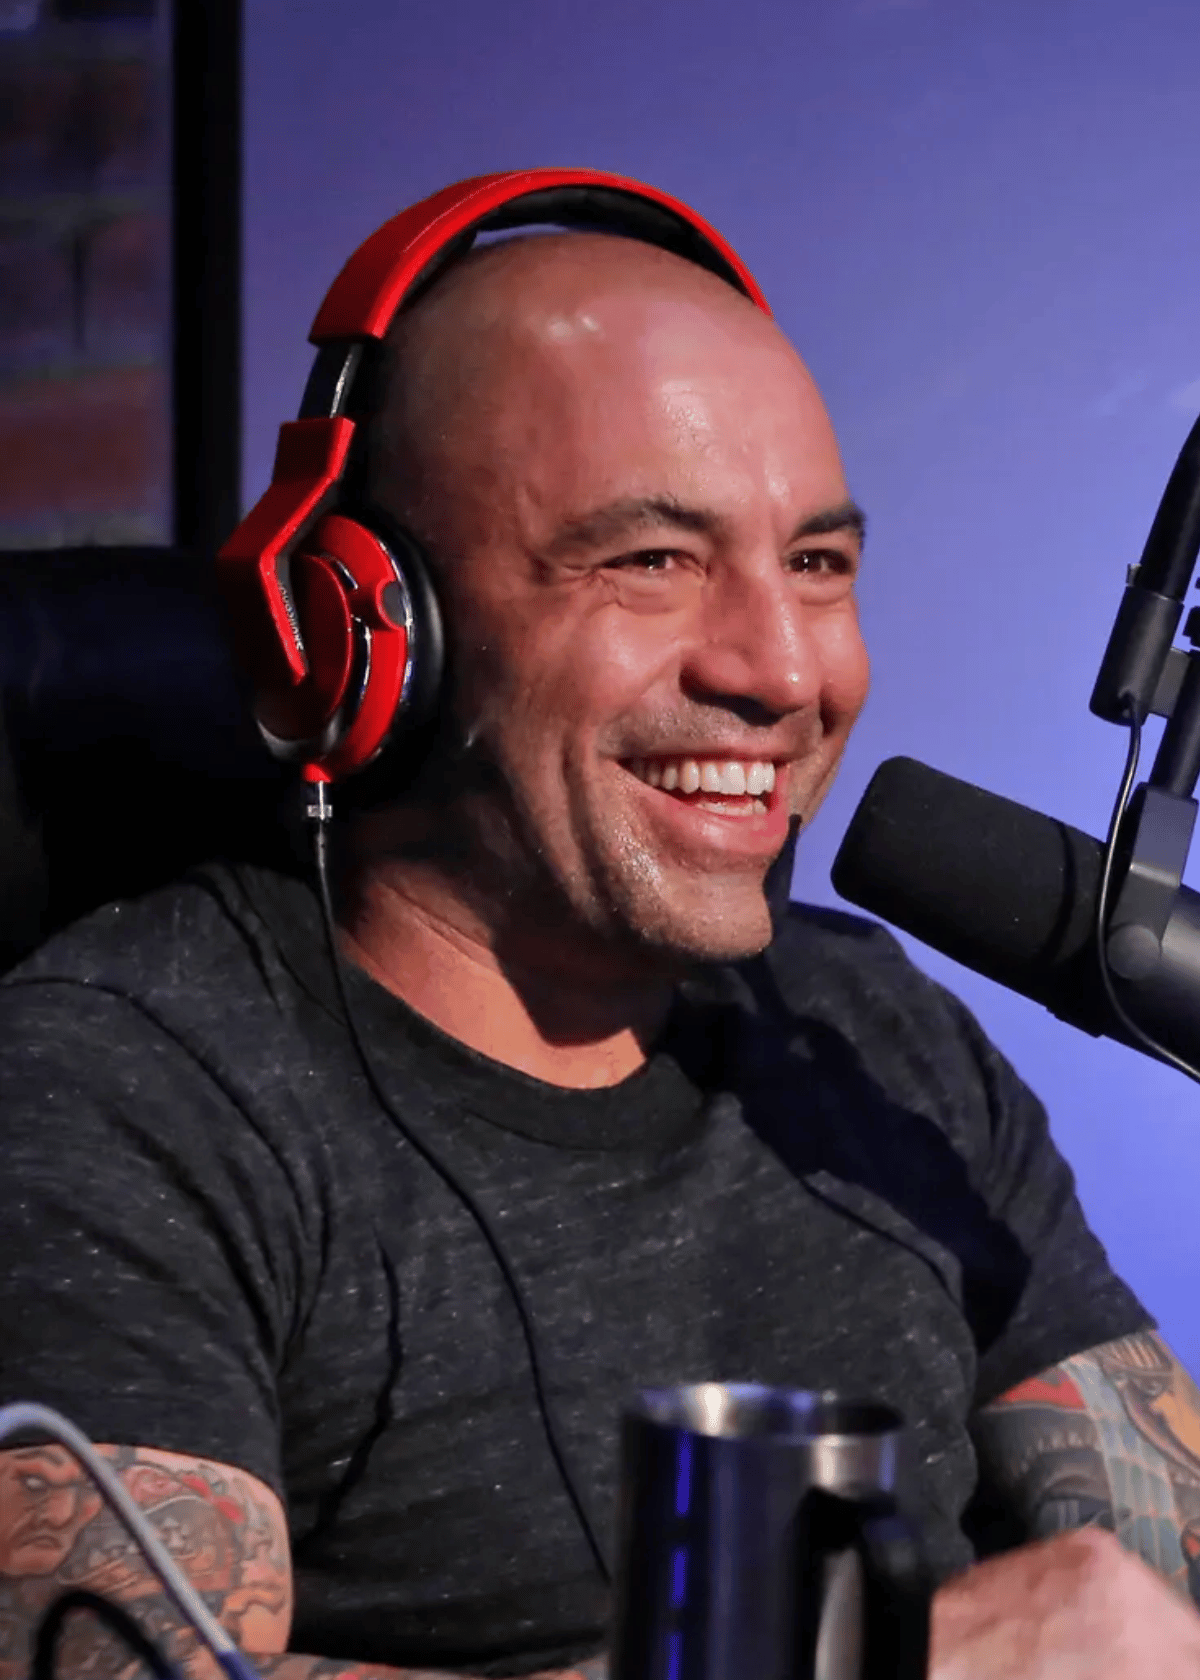 The Best Headphones for Podcasting That Even The Biggest Podcasters Like Joe Rogan Are Praising! 🎧